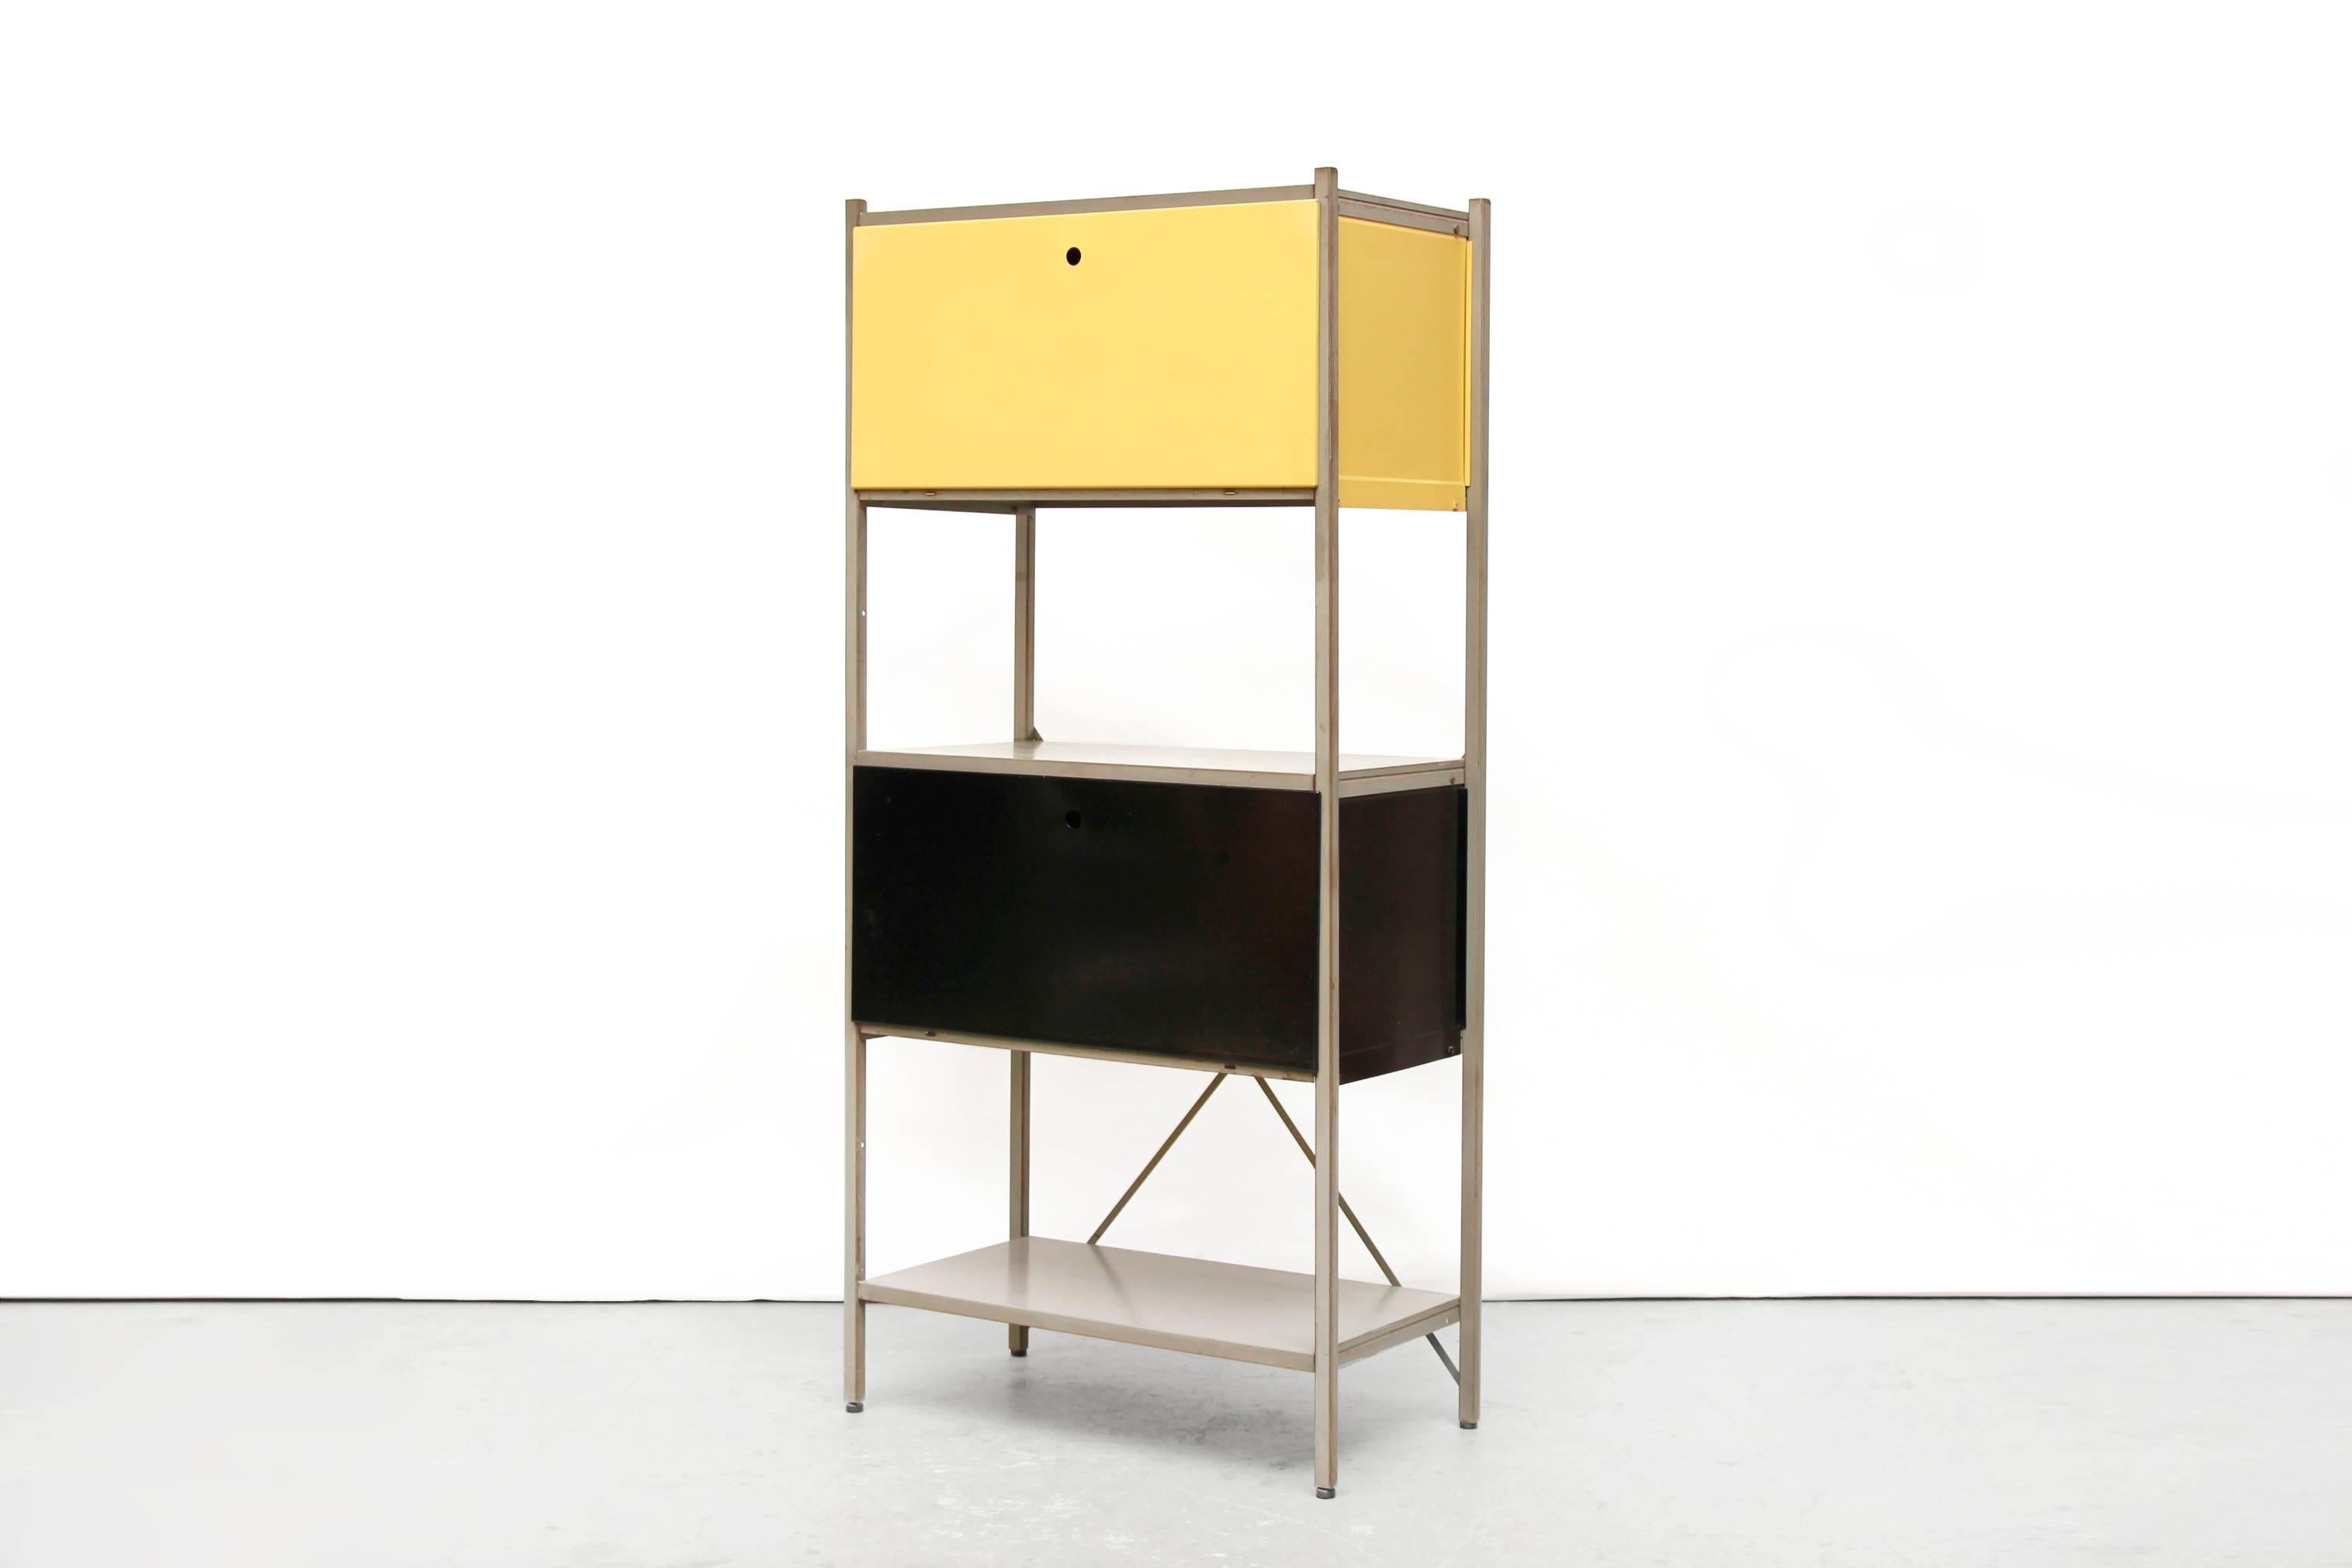 Impressive industrial metal cabinet model no. 663, wall unit or room divider designed by Wim Rietveld (1924-1985) son of Gerrit Rietveld, for Gispen Culemborg in 1954. 
A very nice modular wall unit that can be built by your own taste and needs.